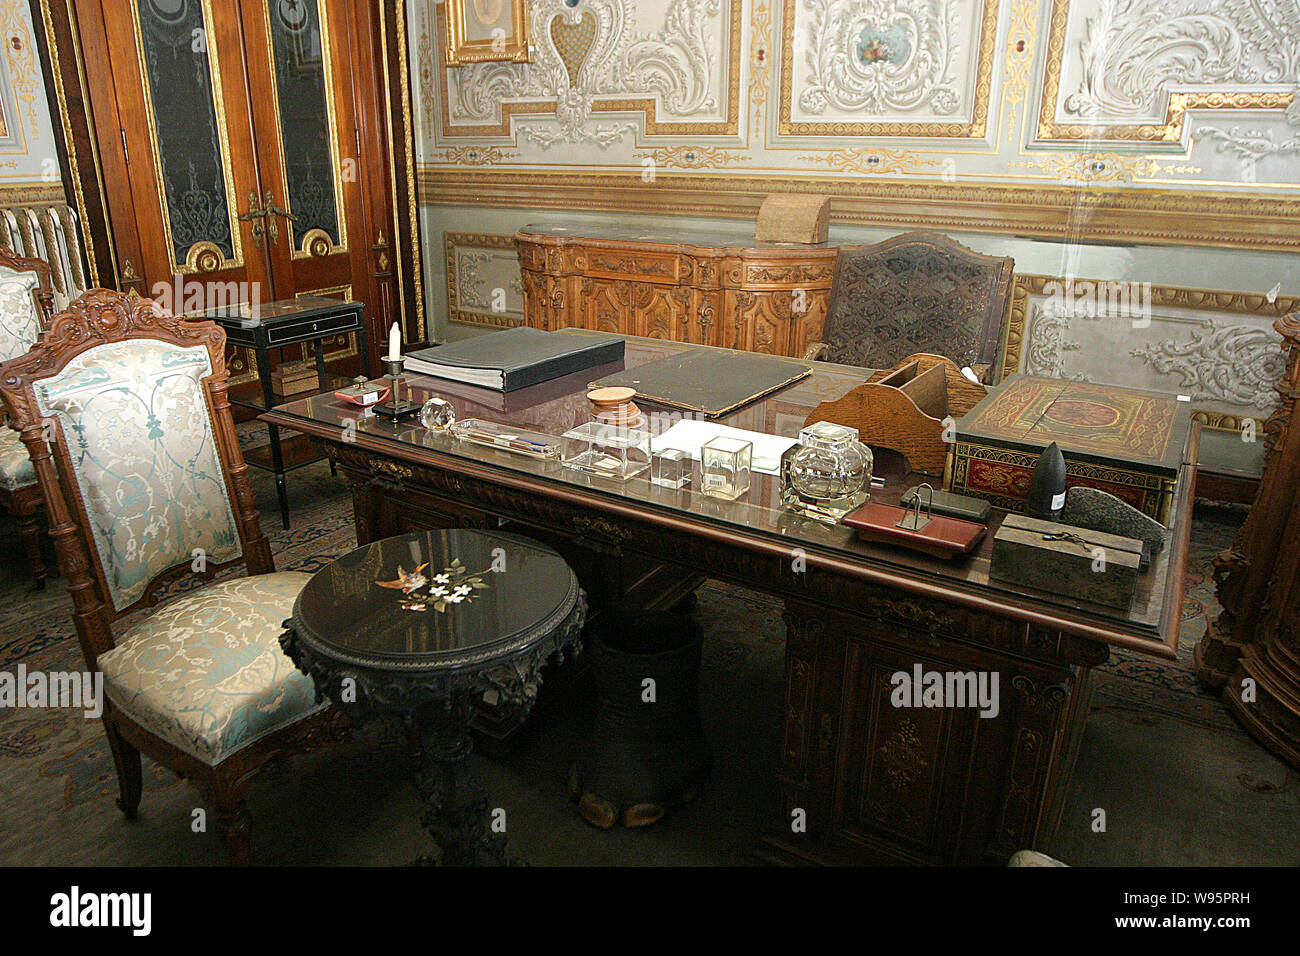 Mustafa Kemal Ataturk's working room at Dolmabahce Palace in Istanbul, Turkey. Palace is administrative center of the Ottoman Empire from 1856 to 1922 Stock Photo